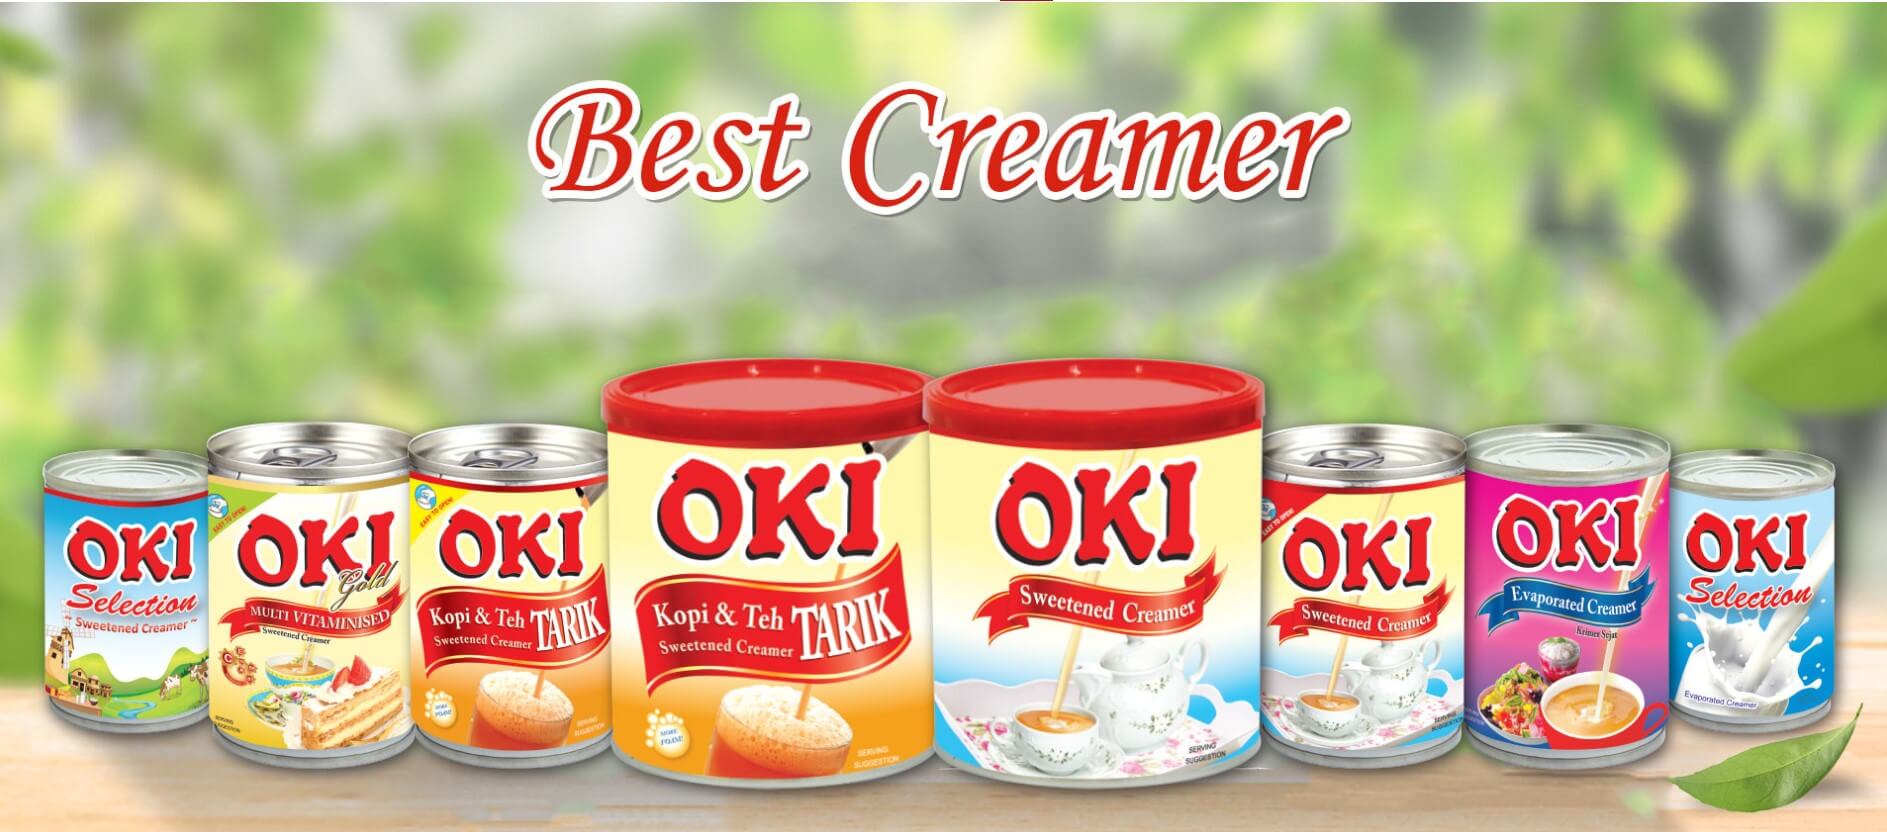 Sweet Desserts with OKI Creamers